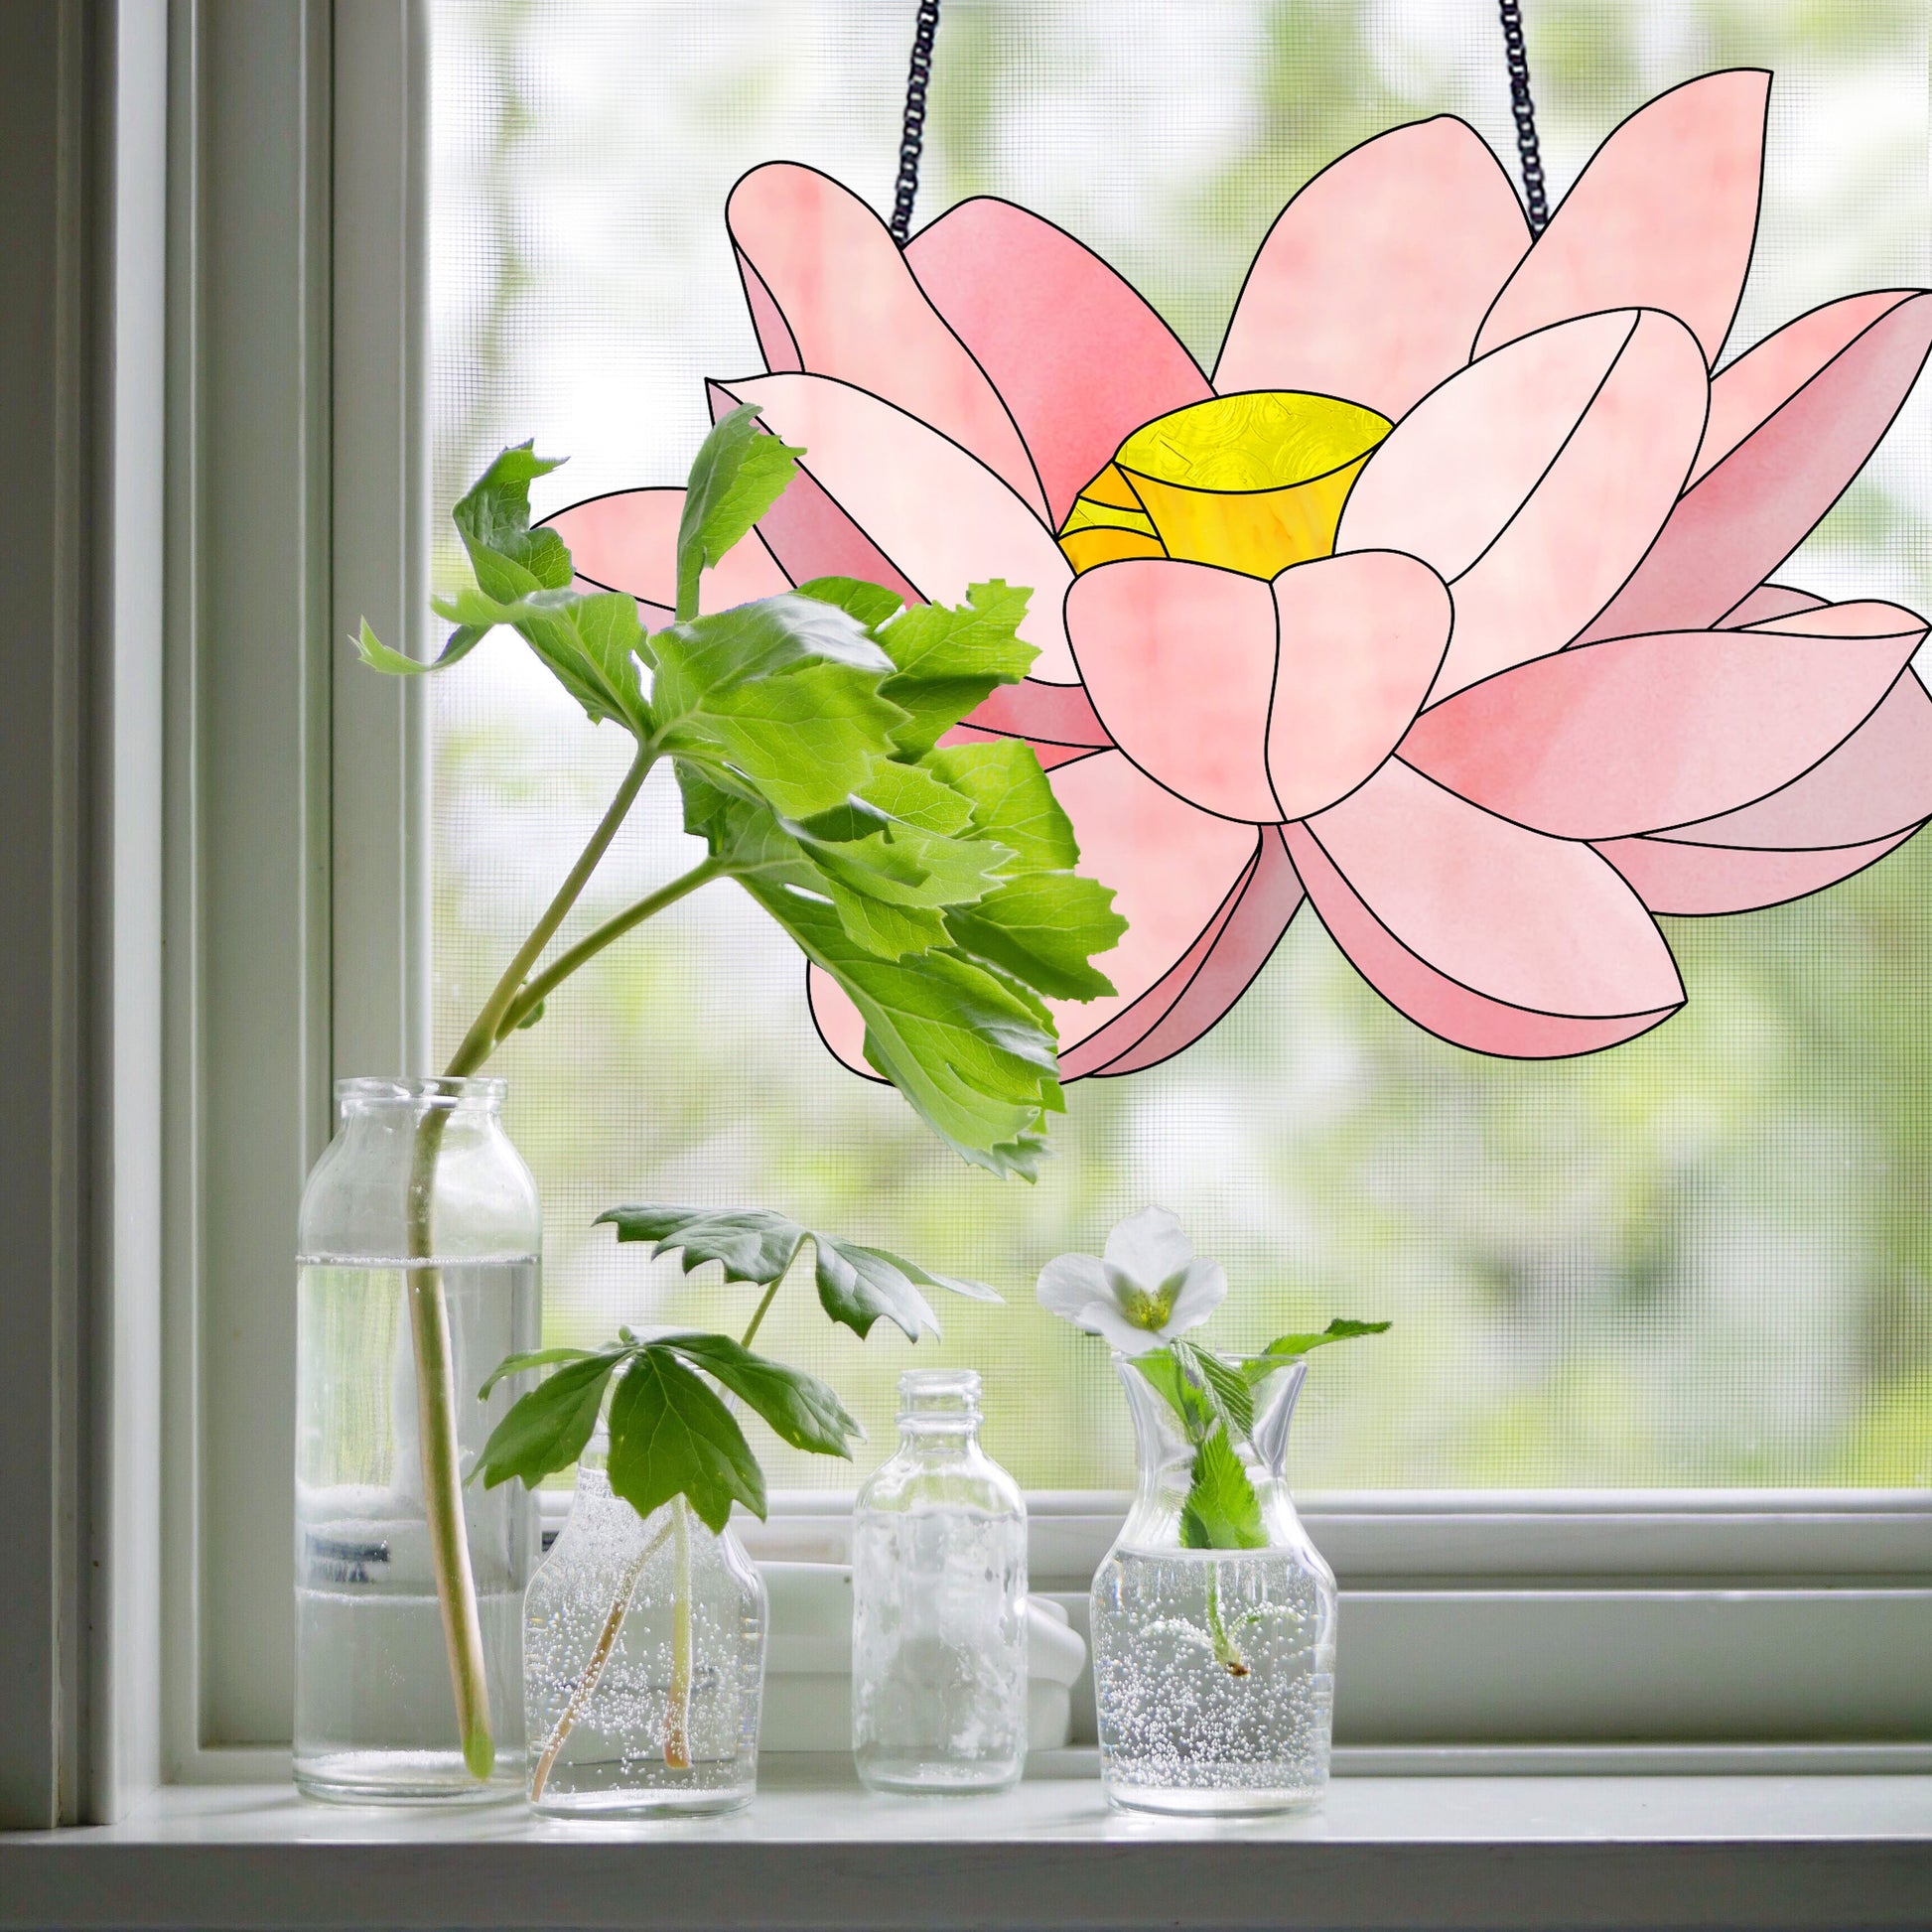 lotus stained glass pattern, instant pdf download, shown hanging in a window with bottles and plants